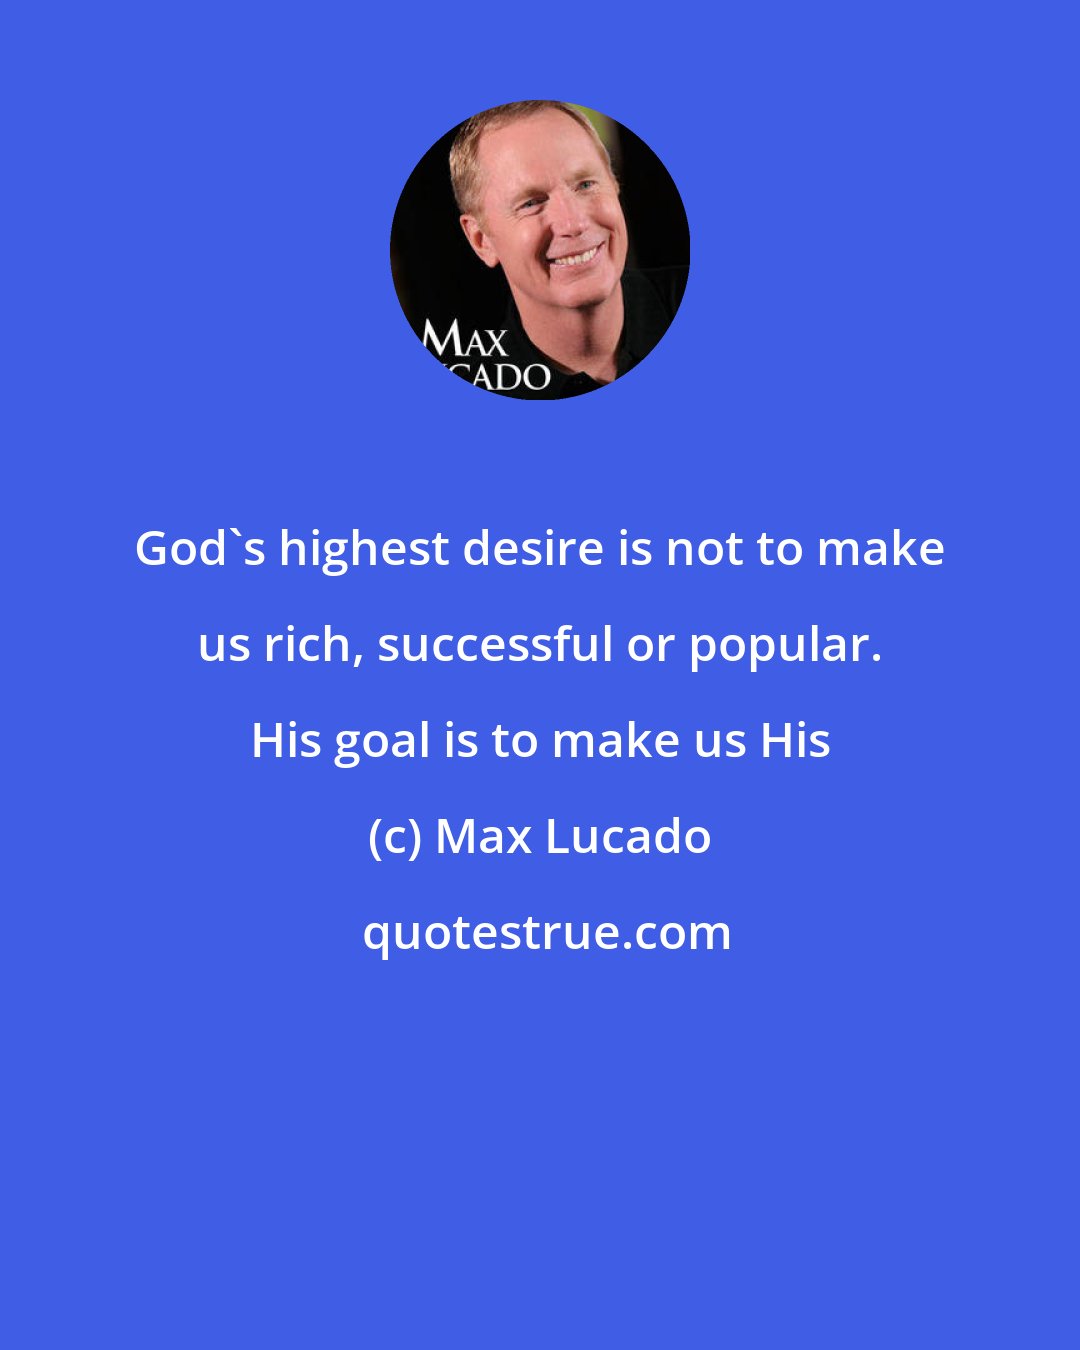 Max Lucado: God's highest desire is not to make us rich, successful or popular. His goal is to make us His